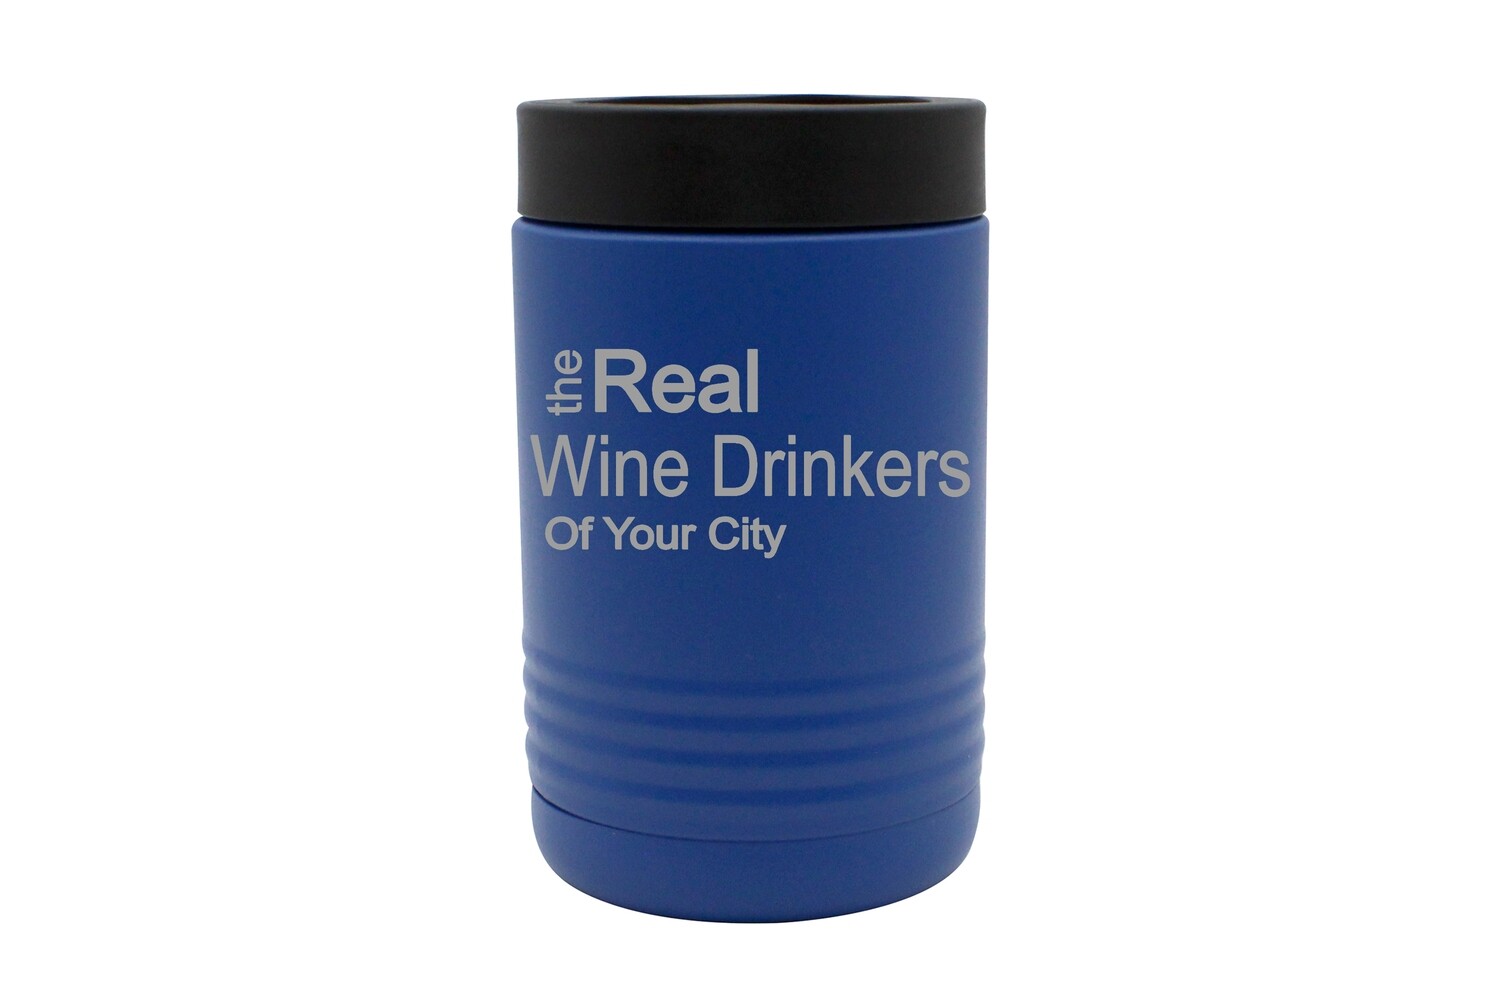 The Real Wine Drinkers of (Add Your Custom Location) Insulated Beverage Holder